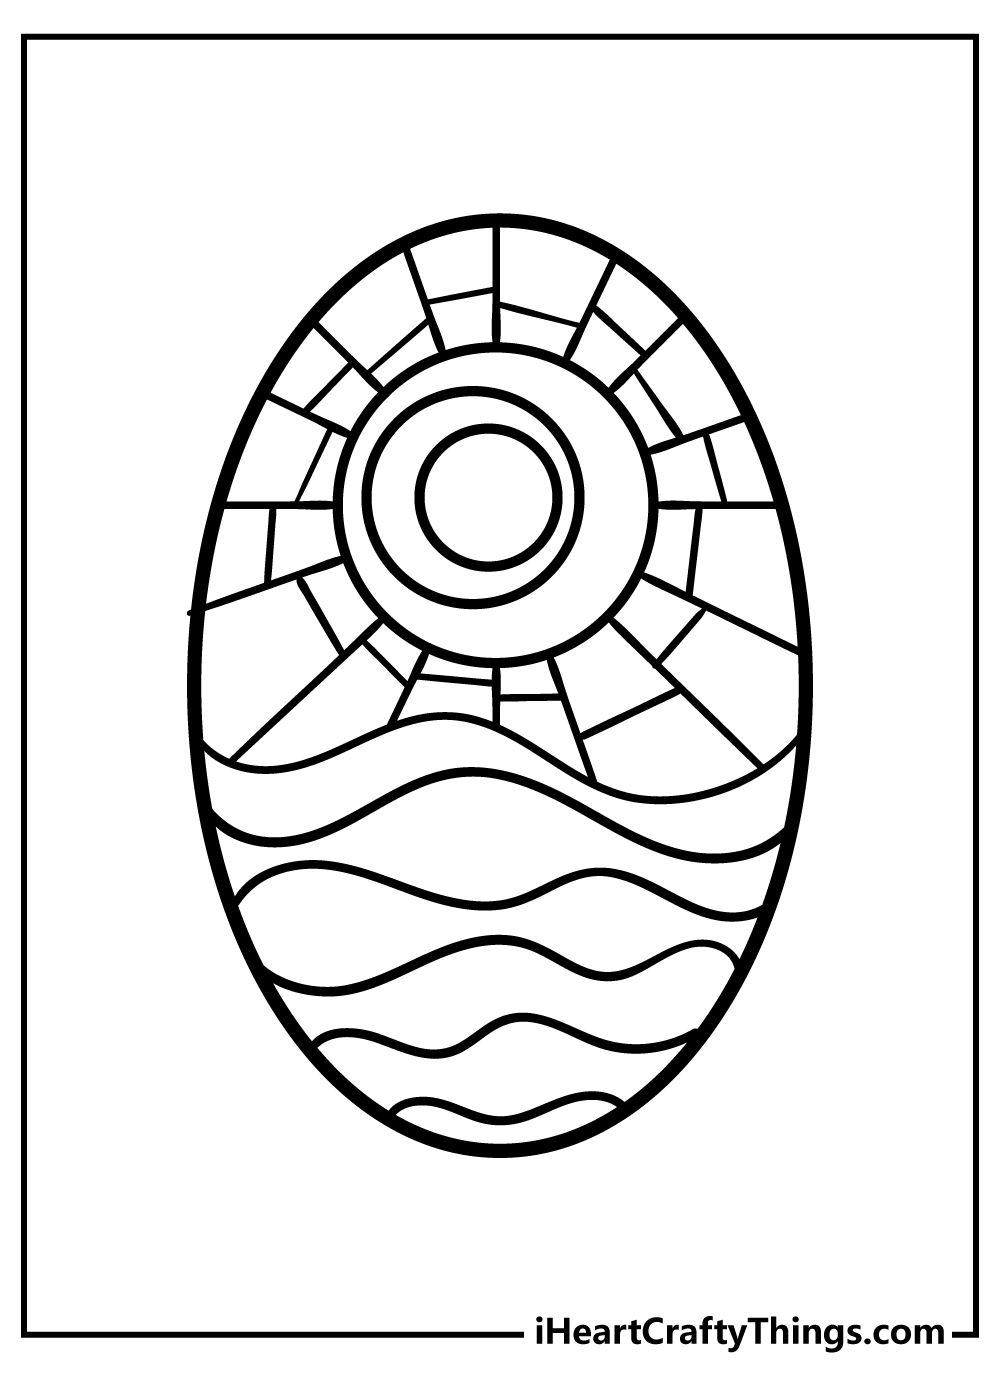 Stained Glass Coloring Book for adults free download